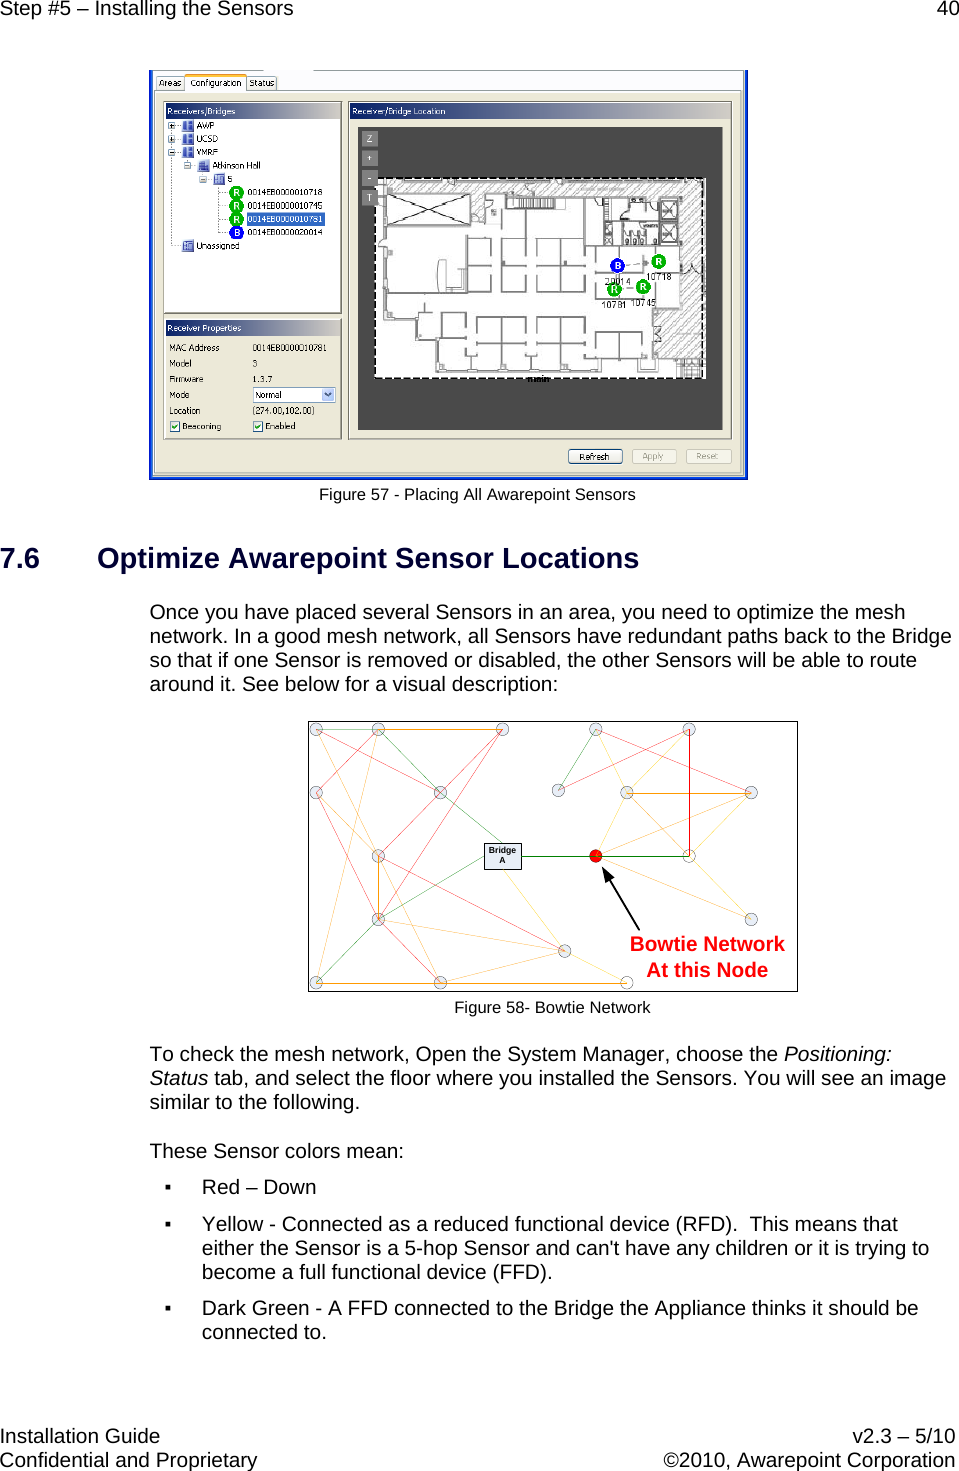 Step #5 – Installing the Sensors    40   Installation Guide    v2.3 – 5/10 Confidential and Proprietary    ©2010, Awarepoint Corporation   Figure 57 - Placing All Awarepoint Sensors 7.6 Optimize Awarepoint Sensor Locations Once you have placed several Sensors in an area, you need to optimize the mesh network. In a good mesh network, all Sensors have redundant paths back to the Bridge so that if one Sensor is removed or disabled, the other Sensors will be able to route around it. See below for a visual description: BridgeABowtie NetworkAt this Node Figure 58- Bowtie Network To check the mesh network, Open the System Manager, choose the Positioning: Status tab, and select the floor where you installed the Sensors. You will see an image similar to the following. These Sensor colors mean: ▪ Red – Down ▪ Yellow - Connected as a reduced functional device (RFD).  This means that either the Sensor is a 5-hop Sensor and can&apos;t have any children or it is trying to become a full functional device (FFD). ▪ Dark Green - A FFD connected to the Bridge the Appliance thinks it should be connected to. 